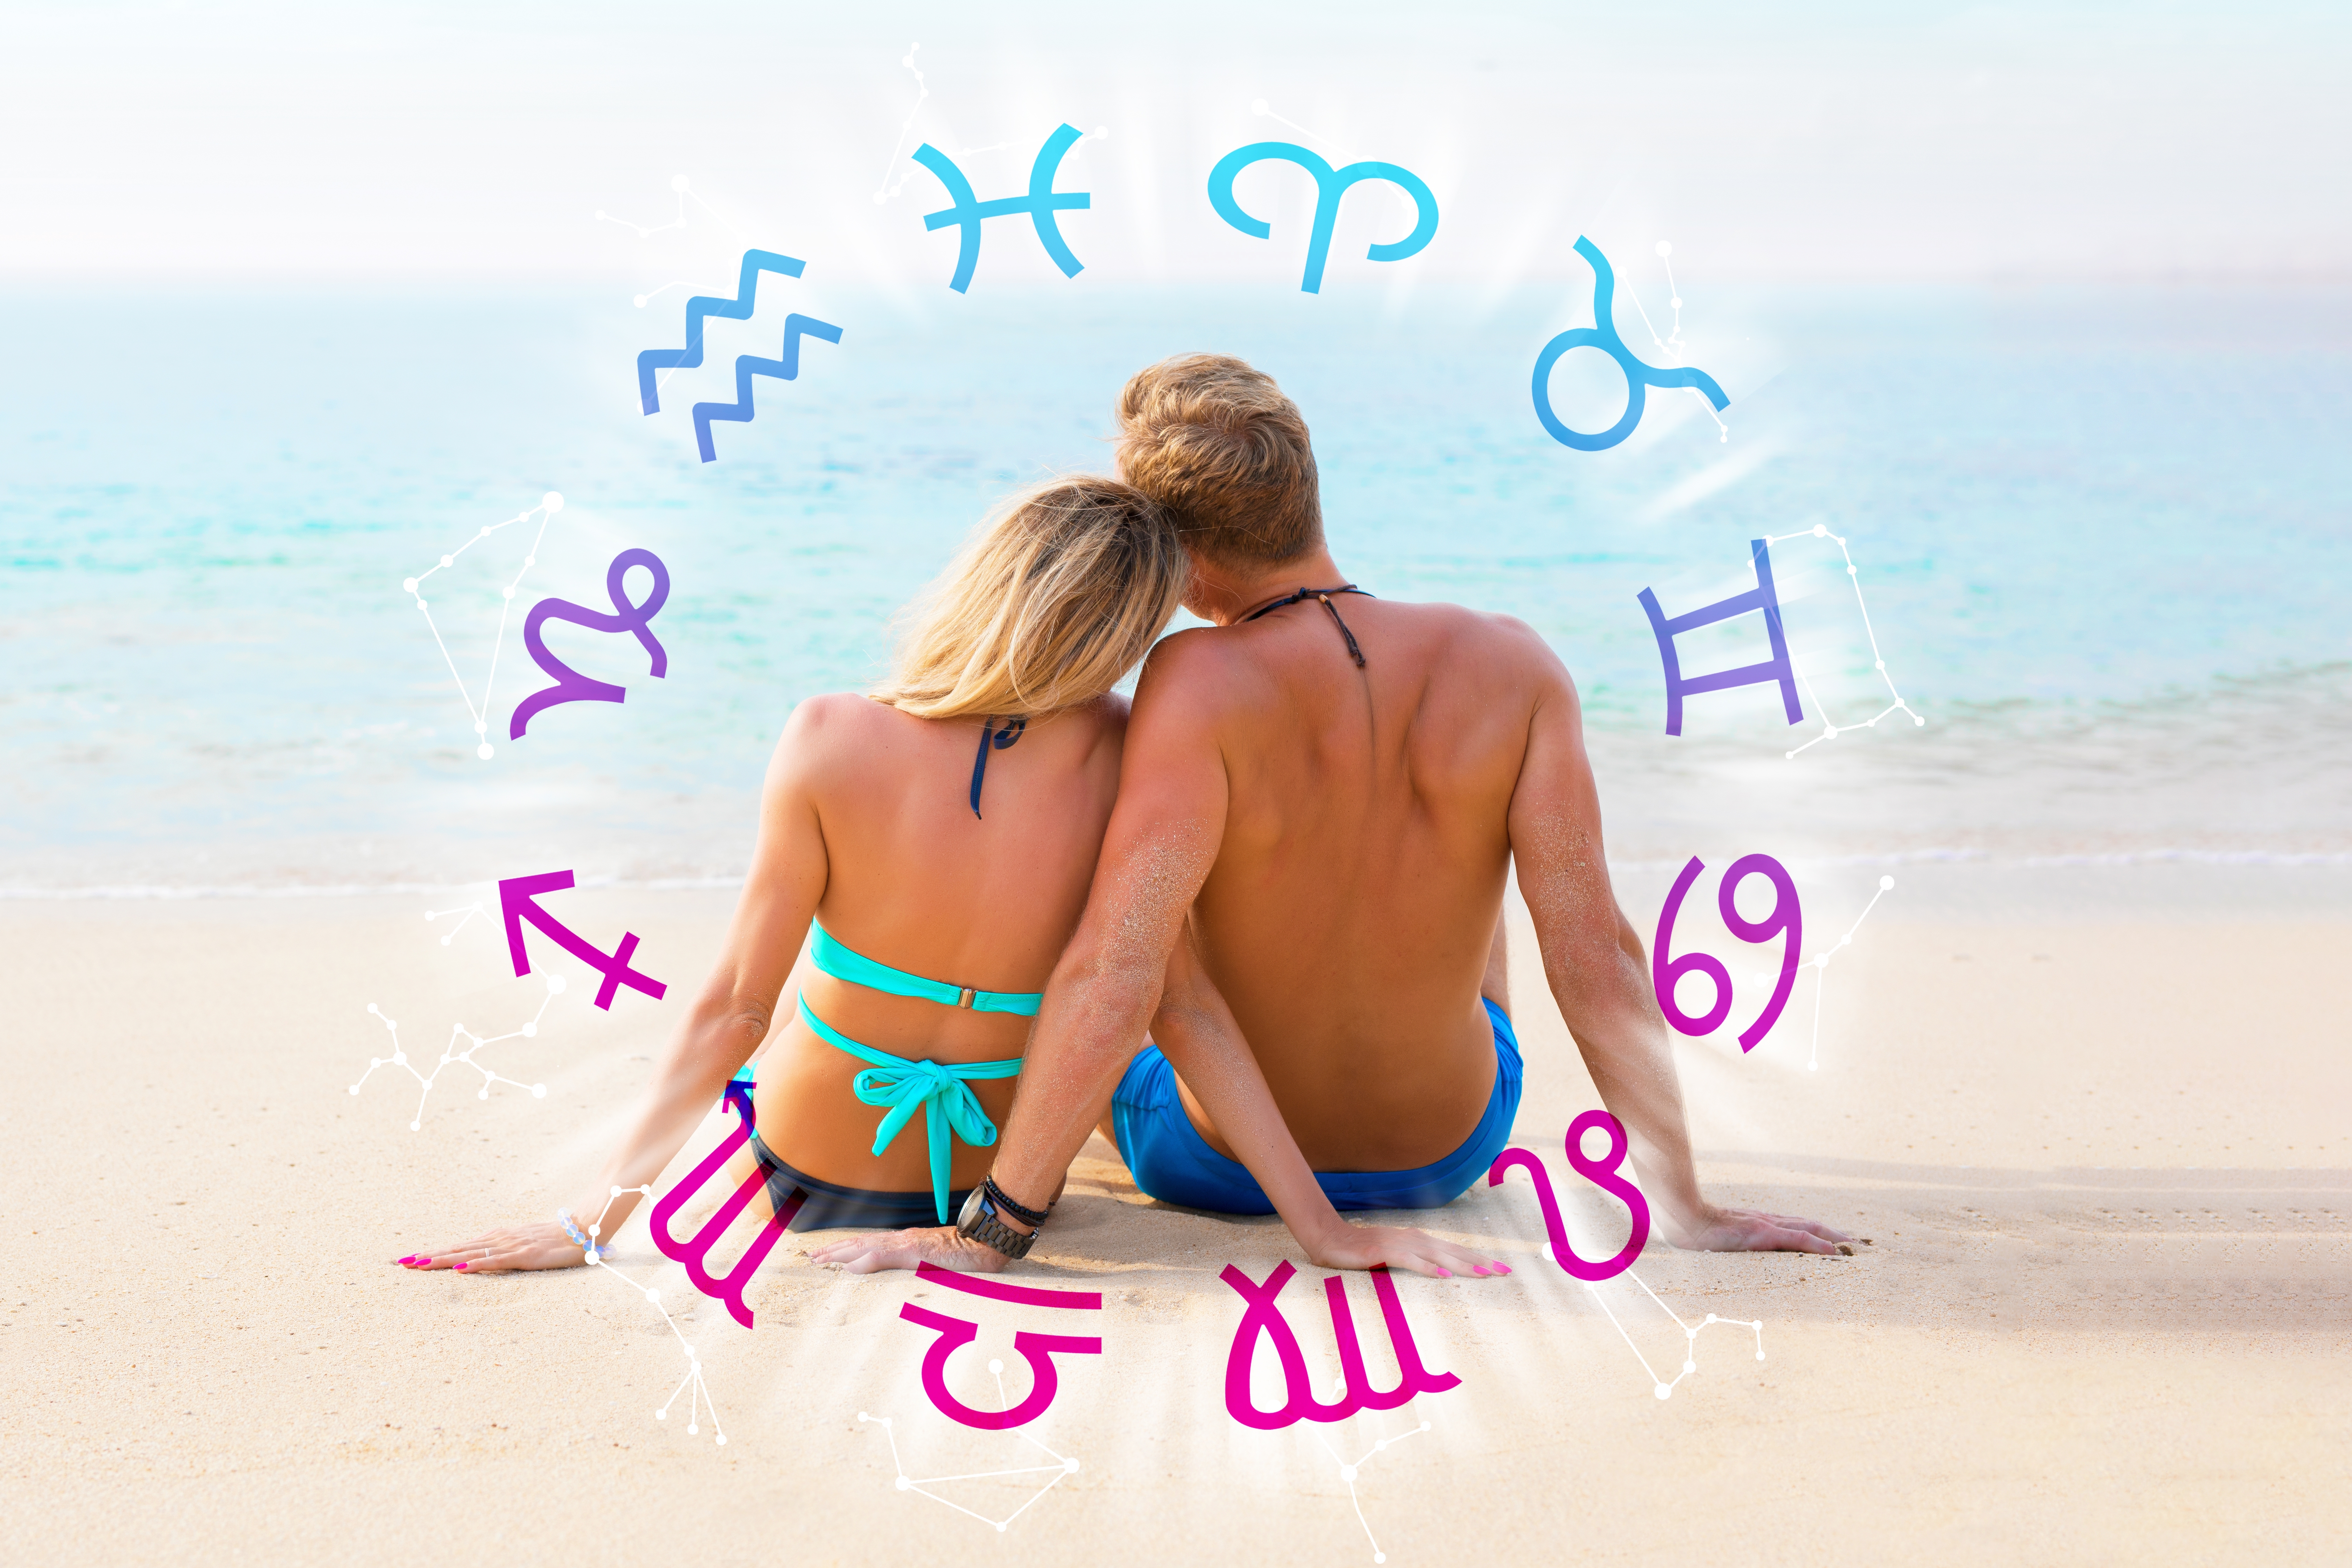 A photo of a couple showcasing the concept of love compatibility and relationships between different zodiac signs | Source: Shutterstock